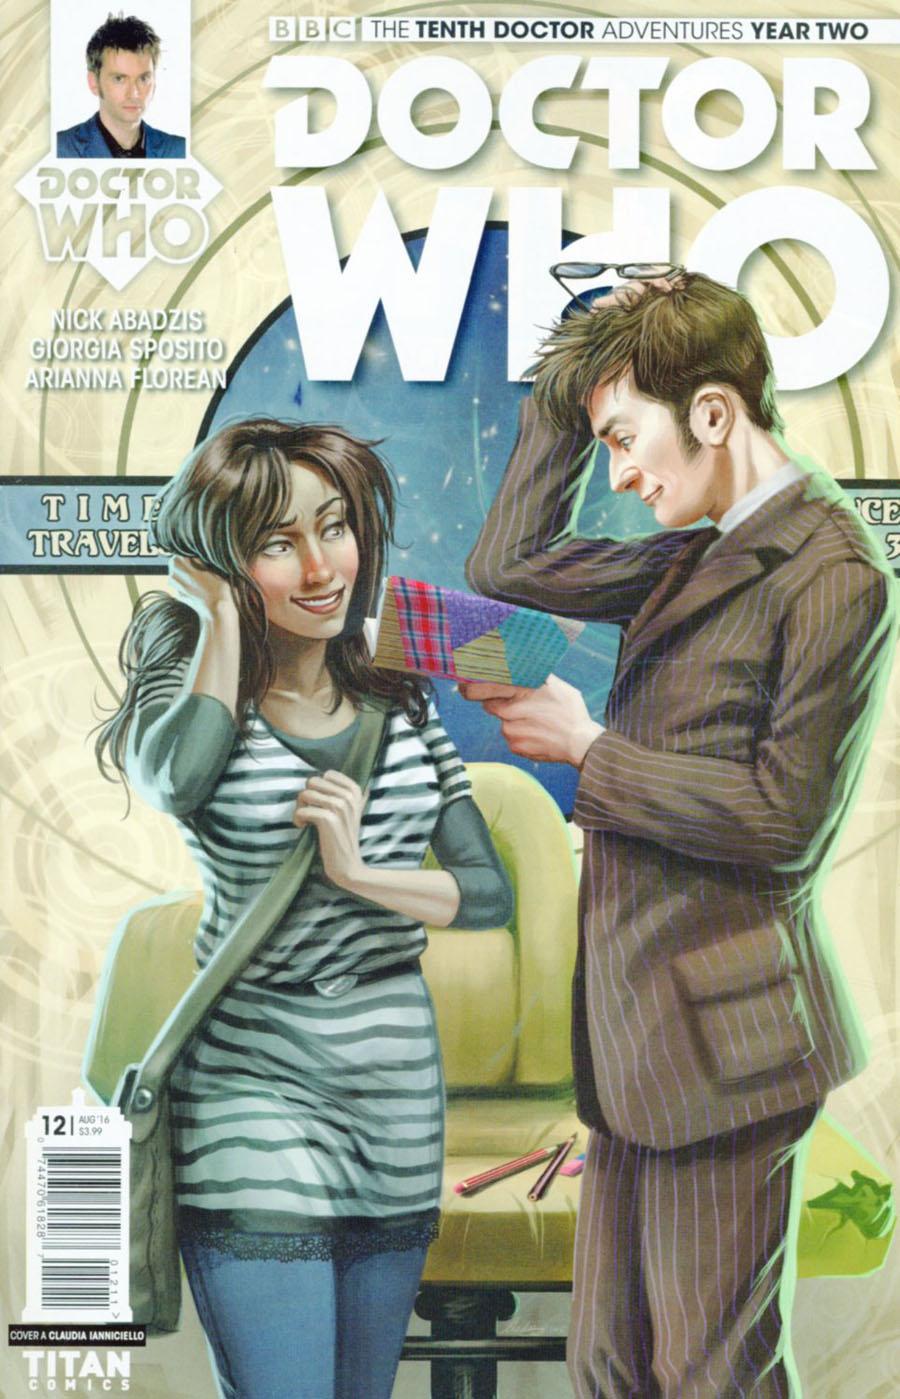 Doctor Who 10th Doctor Year Two Vol. 1 #12